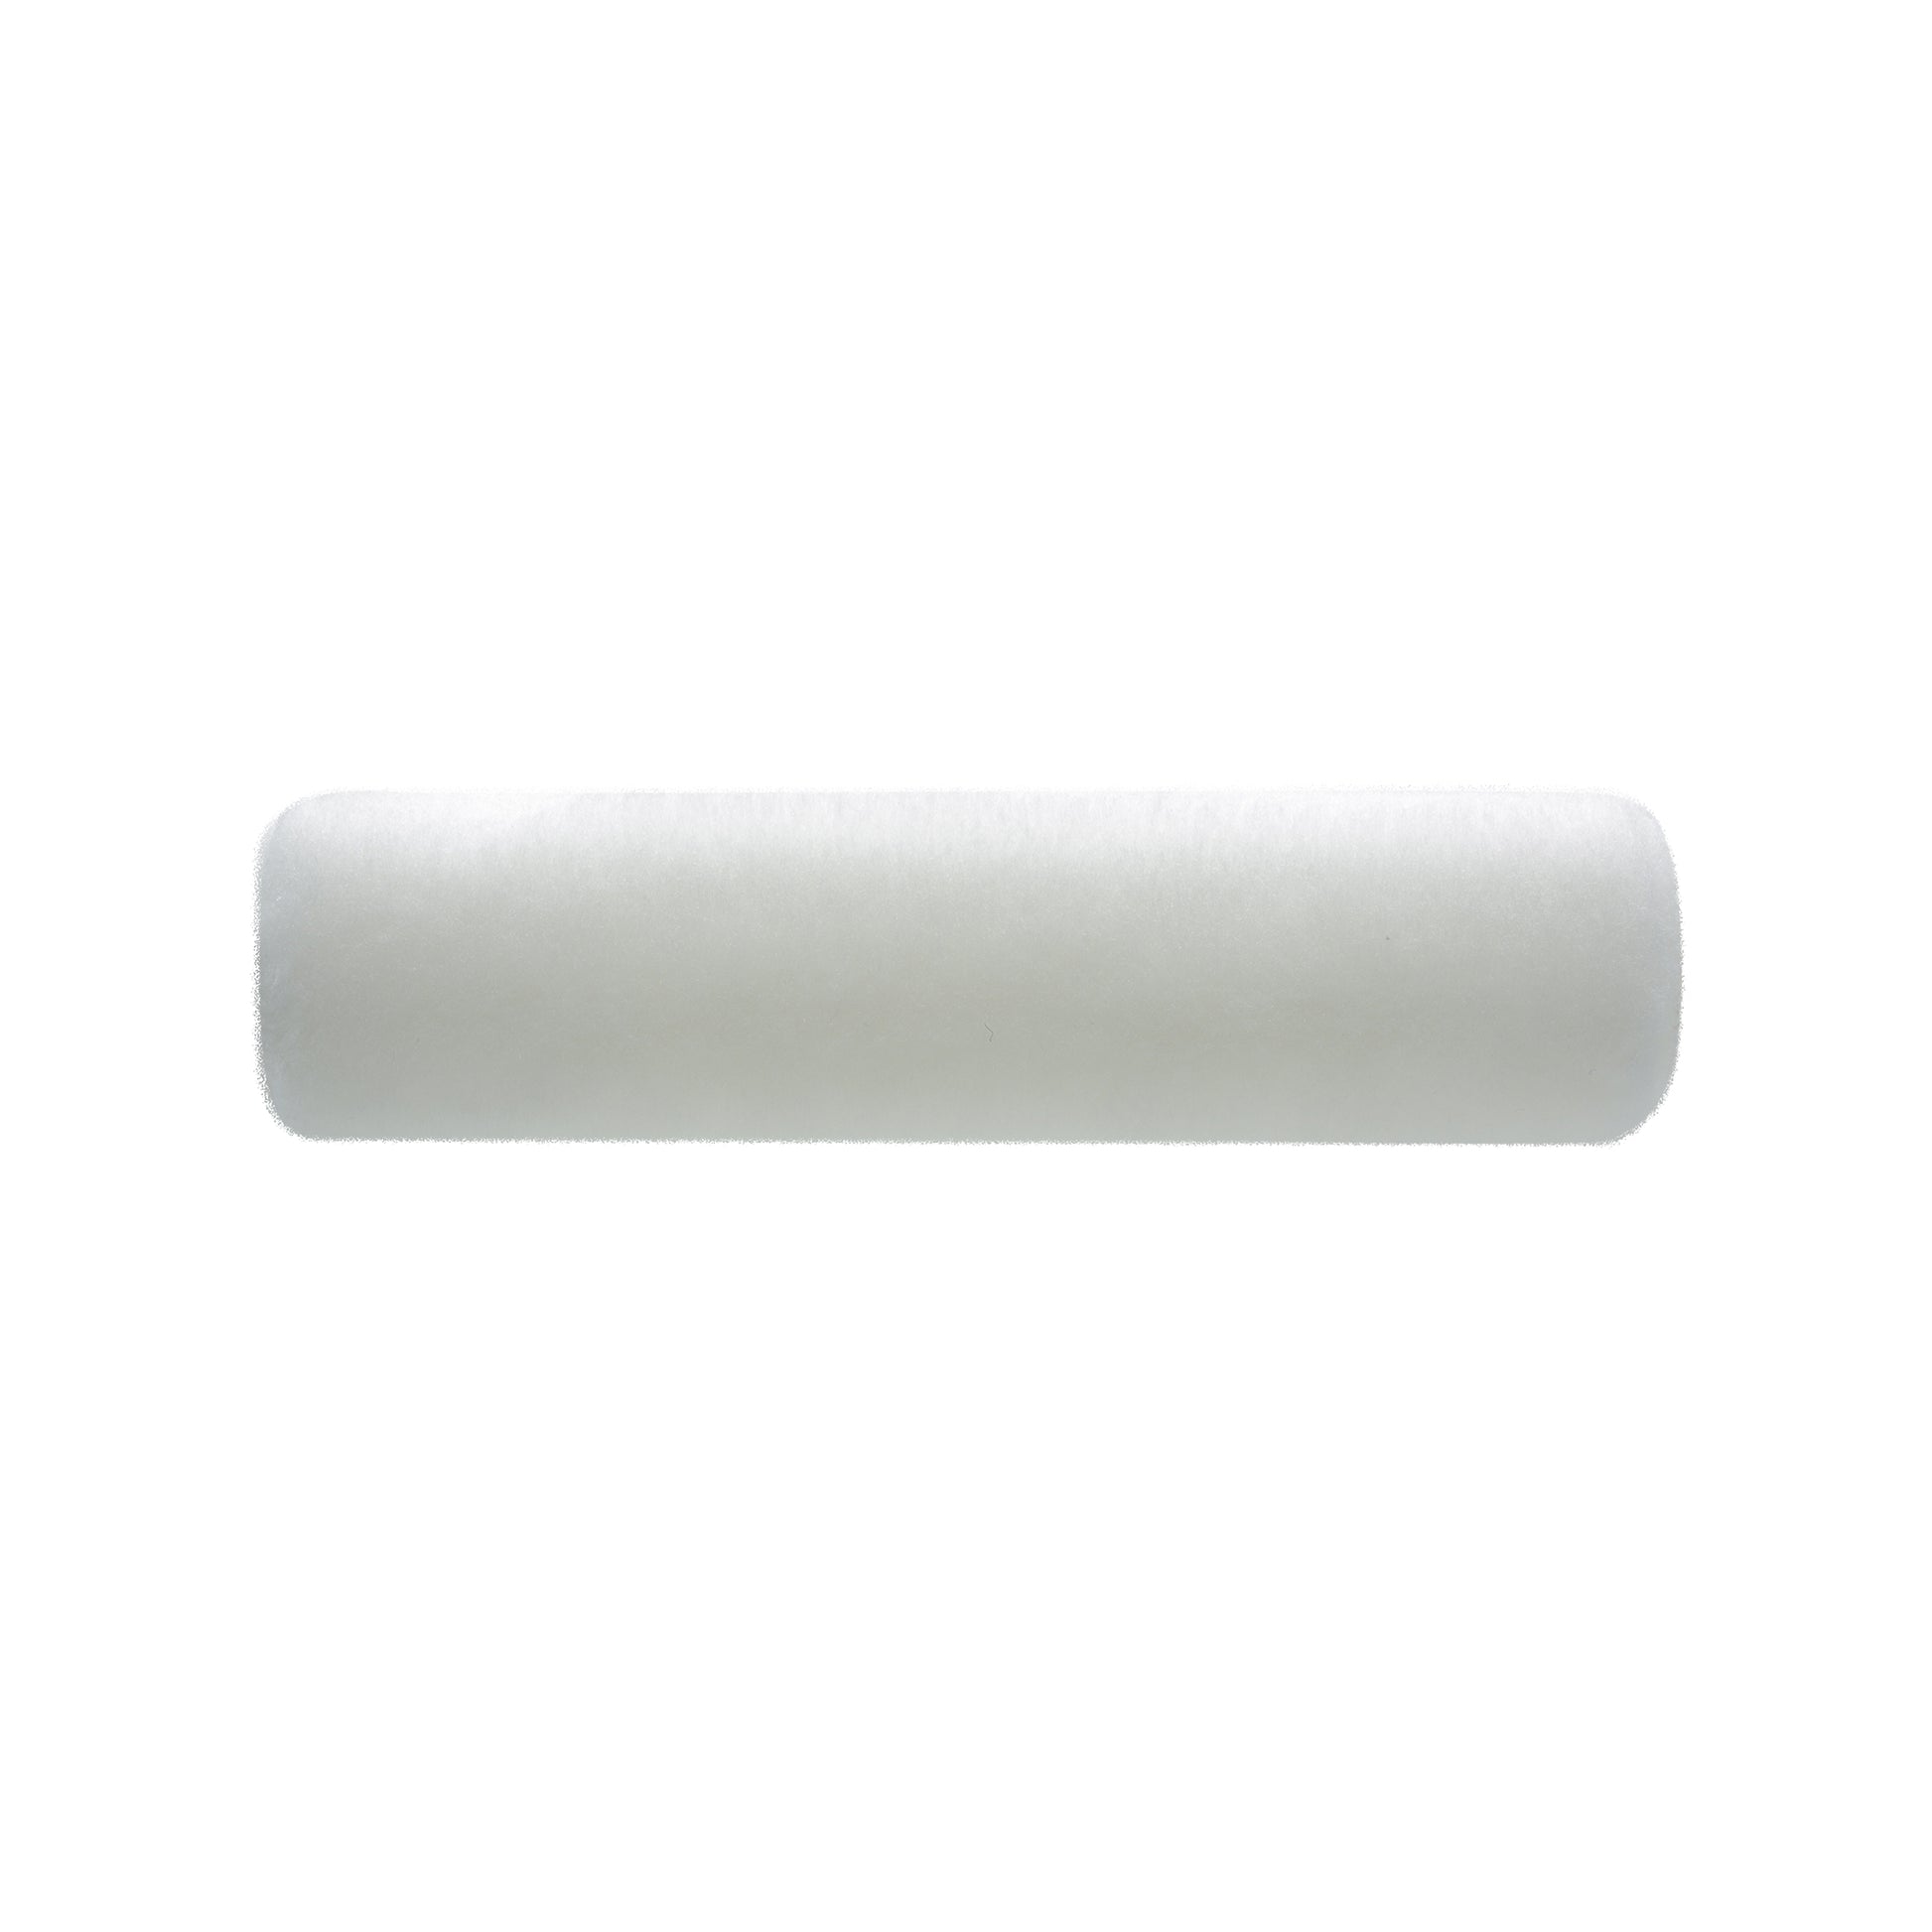 Classic Bathroom & Kitchens roller sleeve -6mm Nap (230mm & 270mm) by Oldfields - Da Vinci Chalk Paint & Rustic home decor